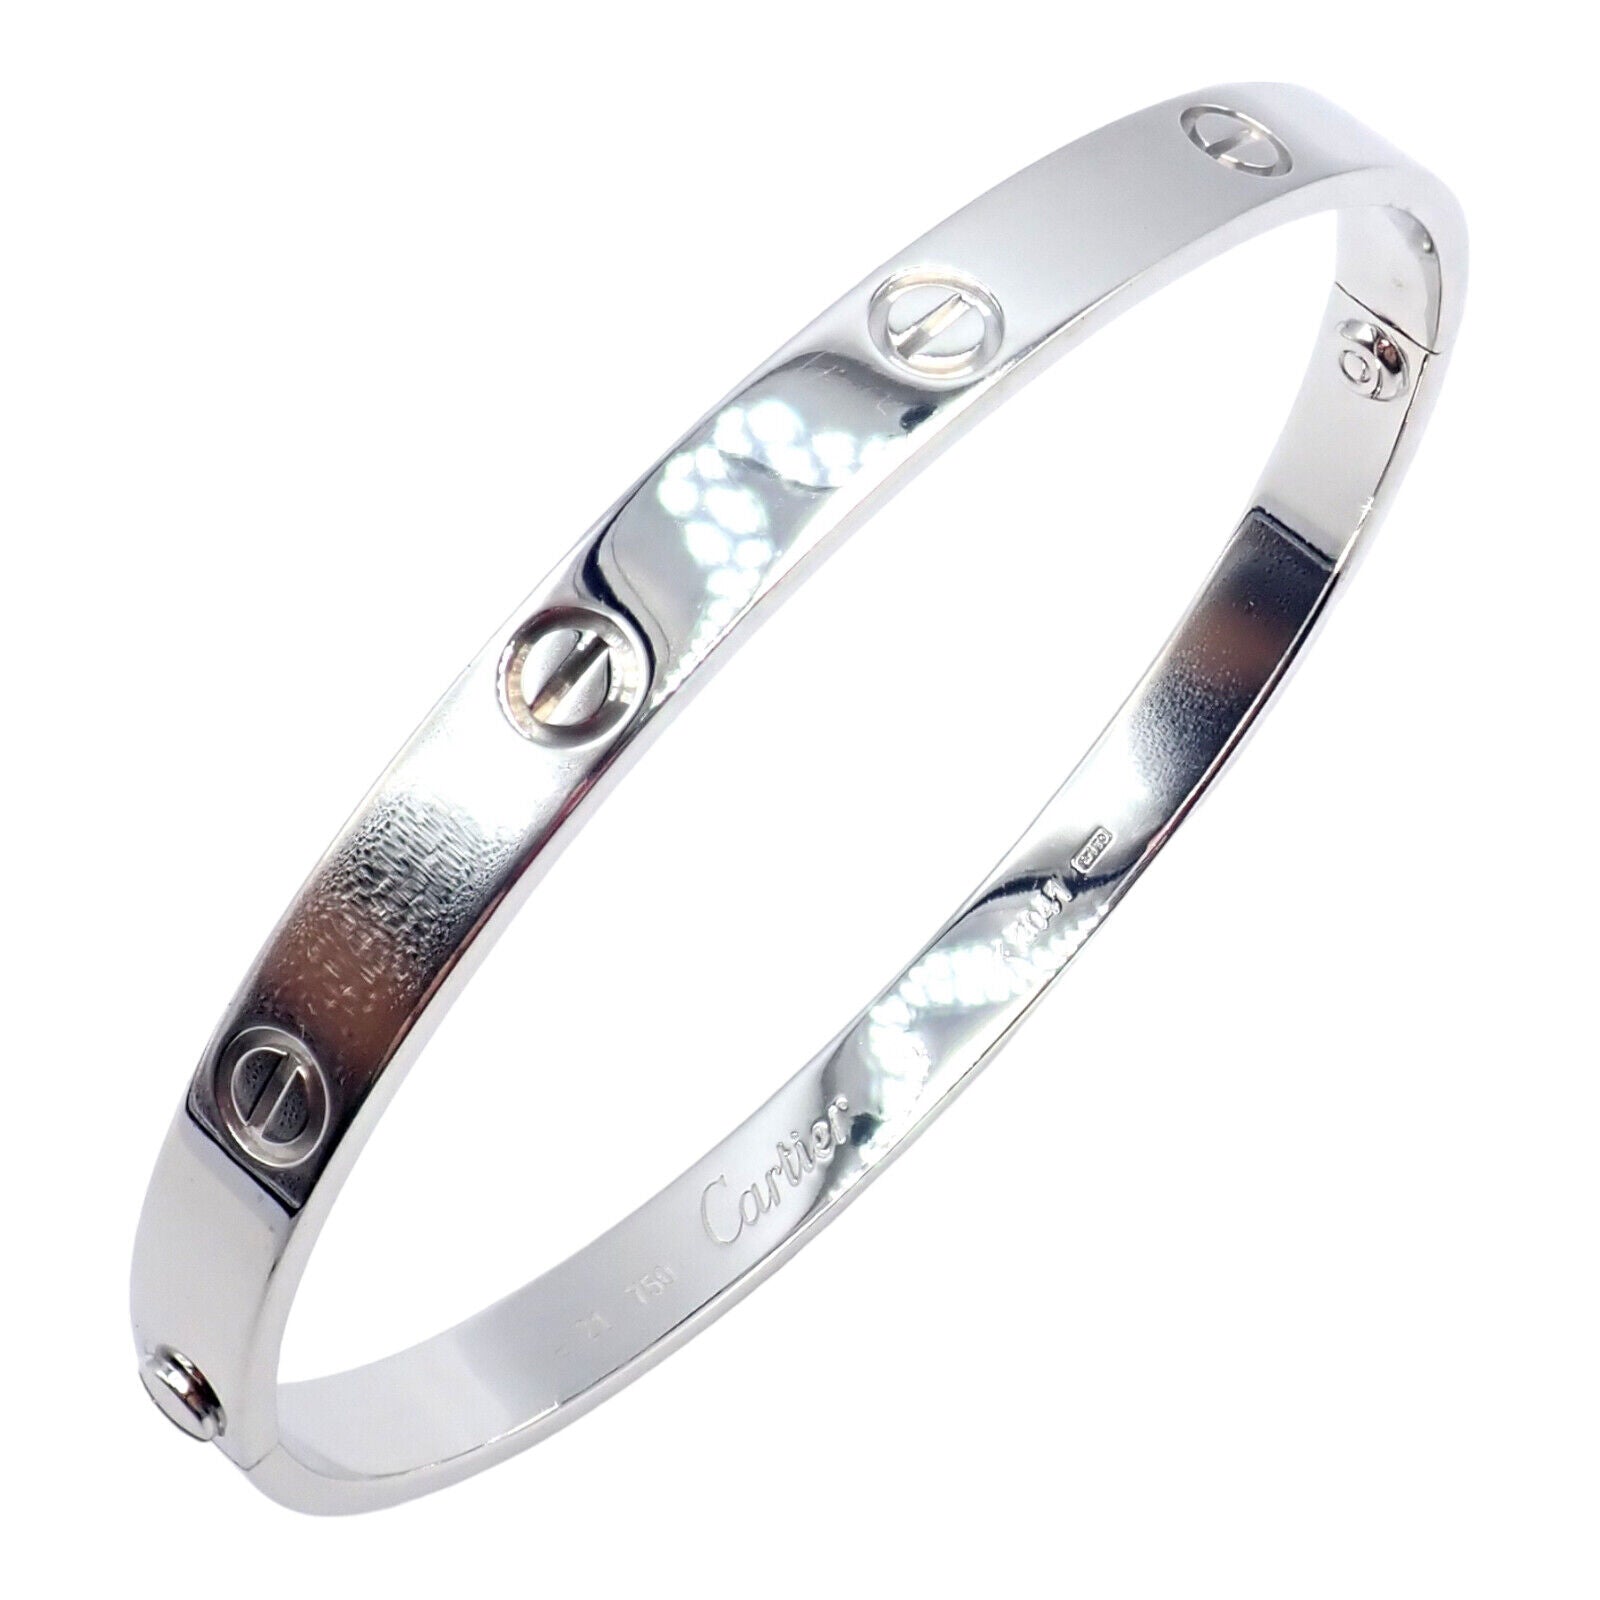 Cartier LOVE Bracelet in Platinum with a Diamond - Cartier Love Bracelets -  Cartier Jewelry